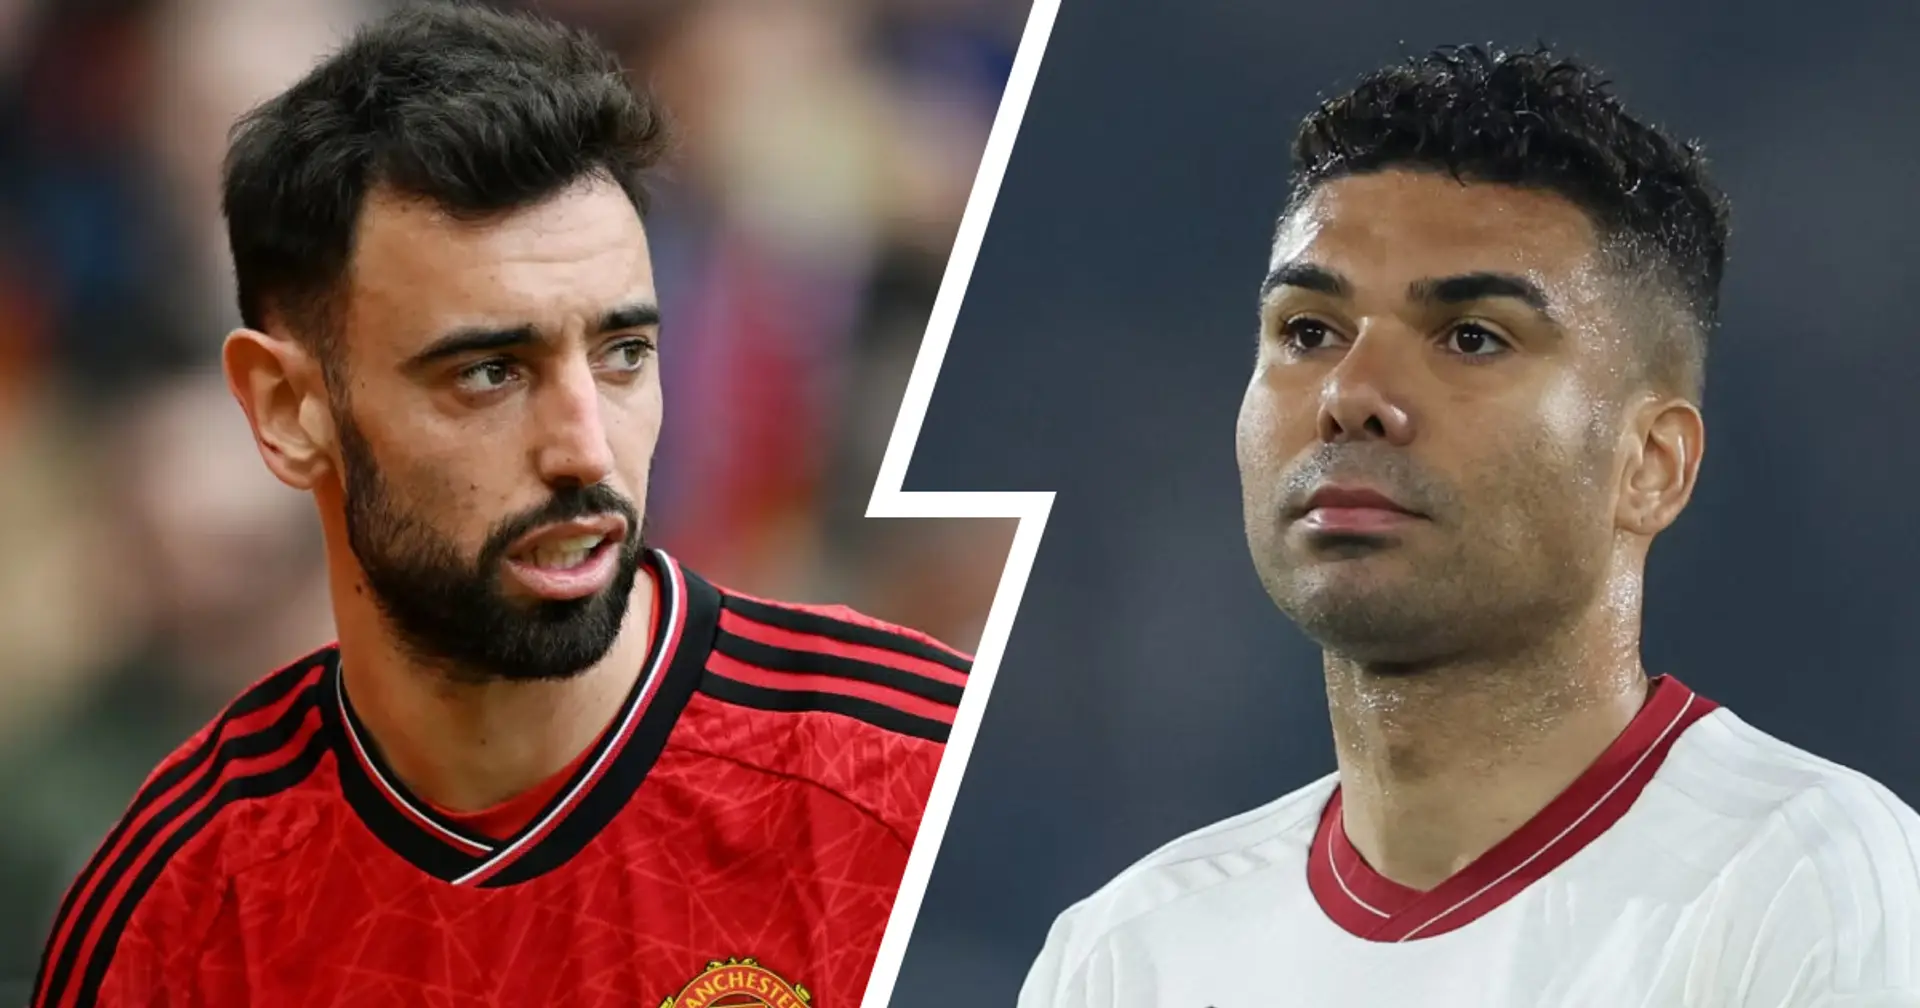 Saudi Pro League wants both Casemiro and Bruno Fernandes, one deal is far more likely (reliability: 5 stars)